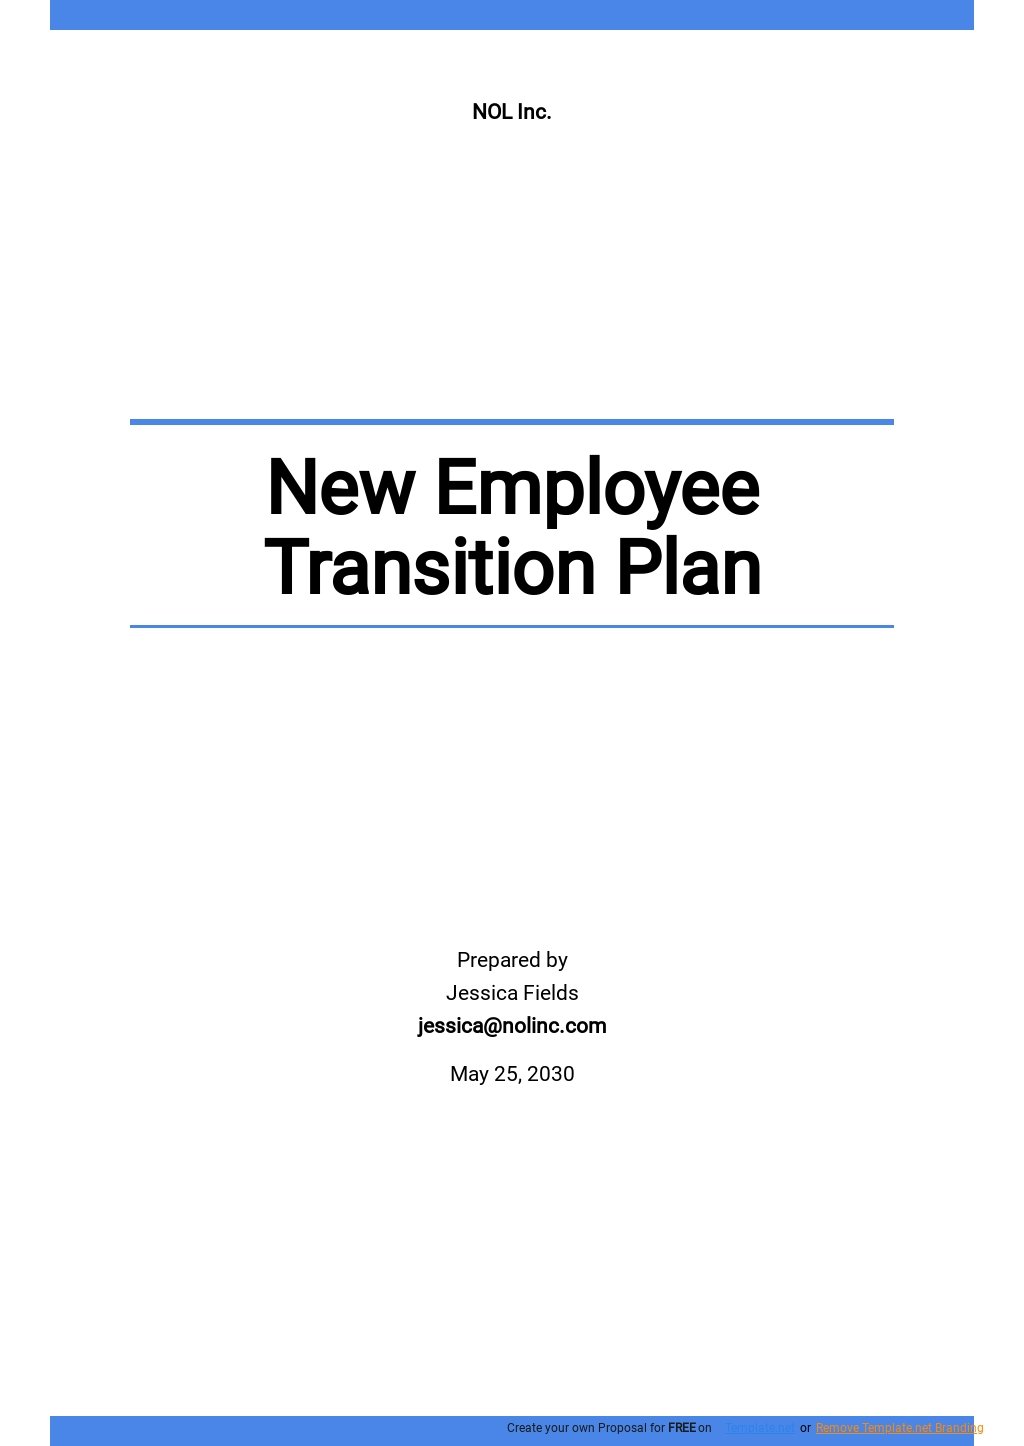 New Employee Transition Plan Template